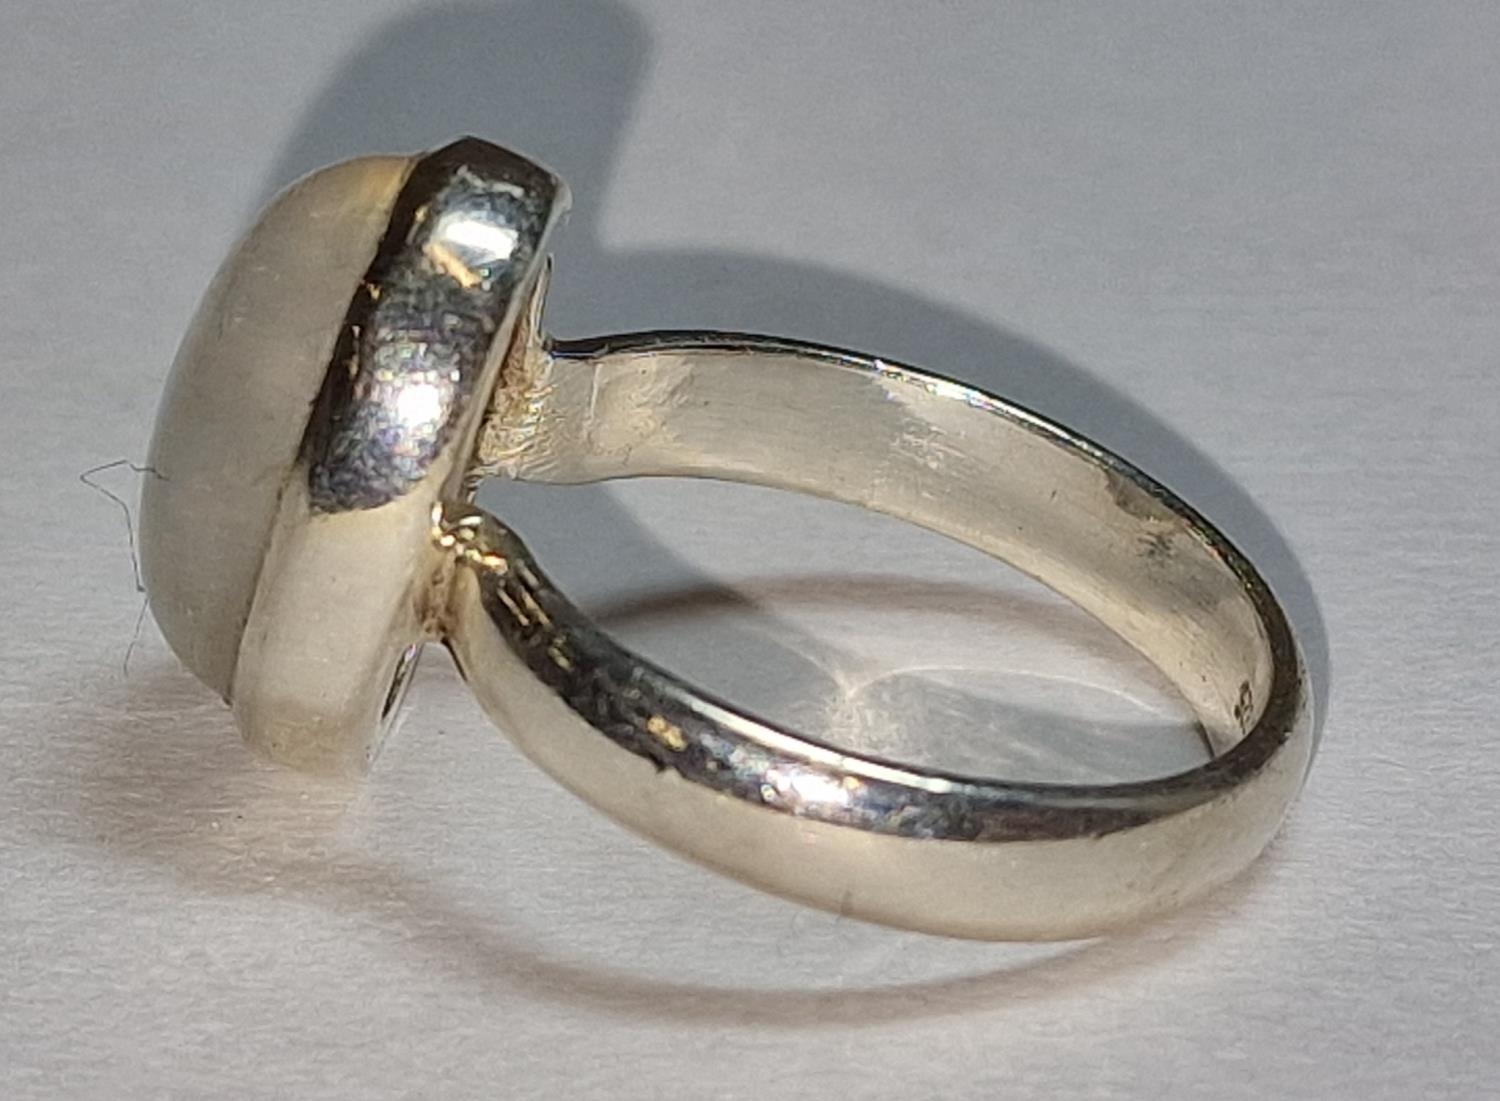 A S925 silver and moonstone ring, Size P - Image 2 of 3